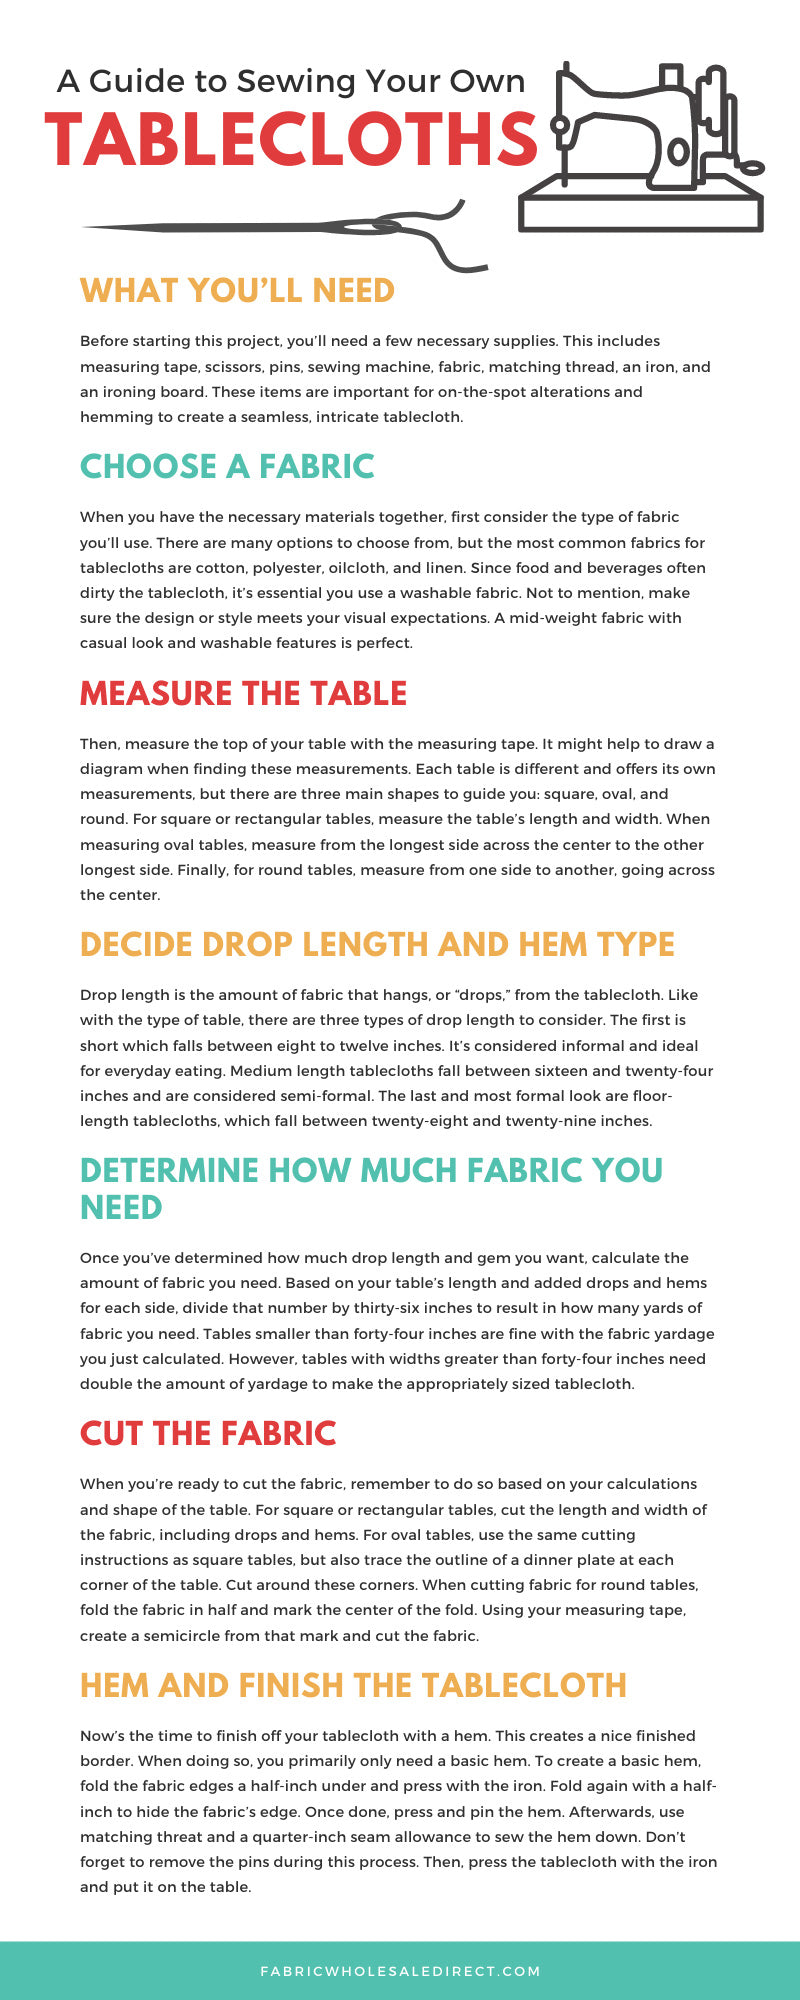 A Guide to Sewing Your Own Tablecloths